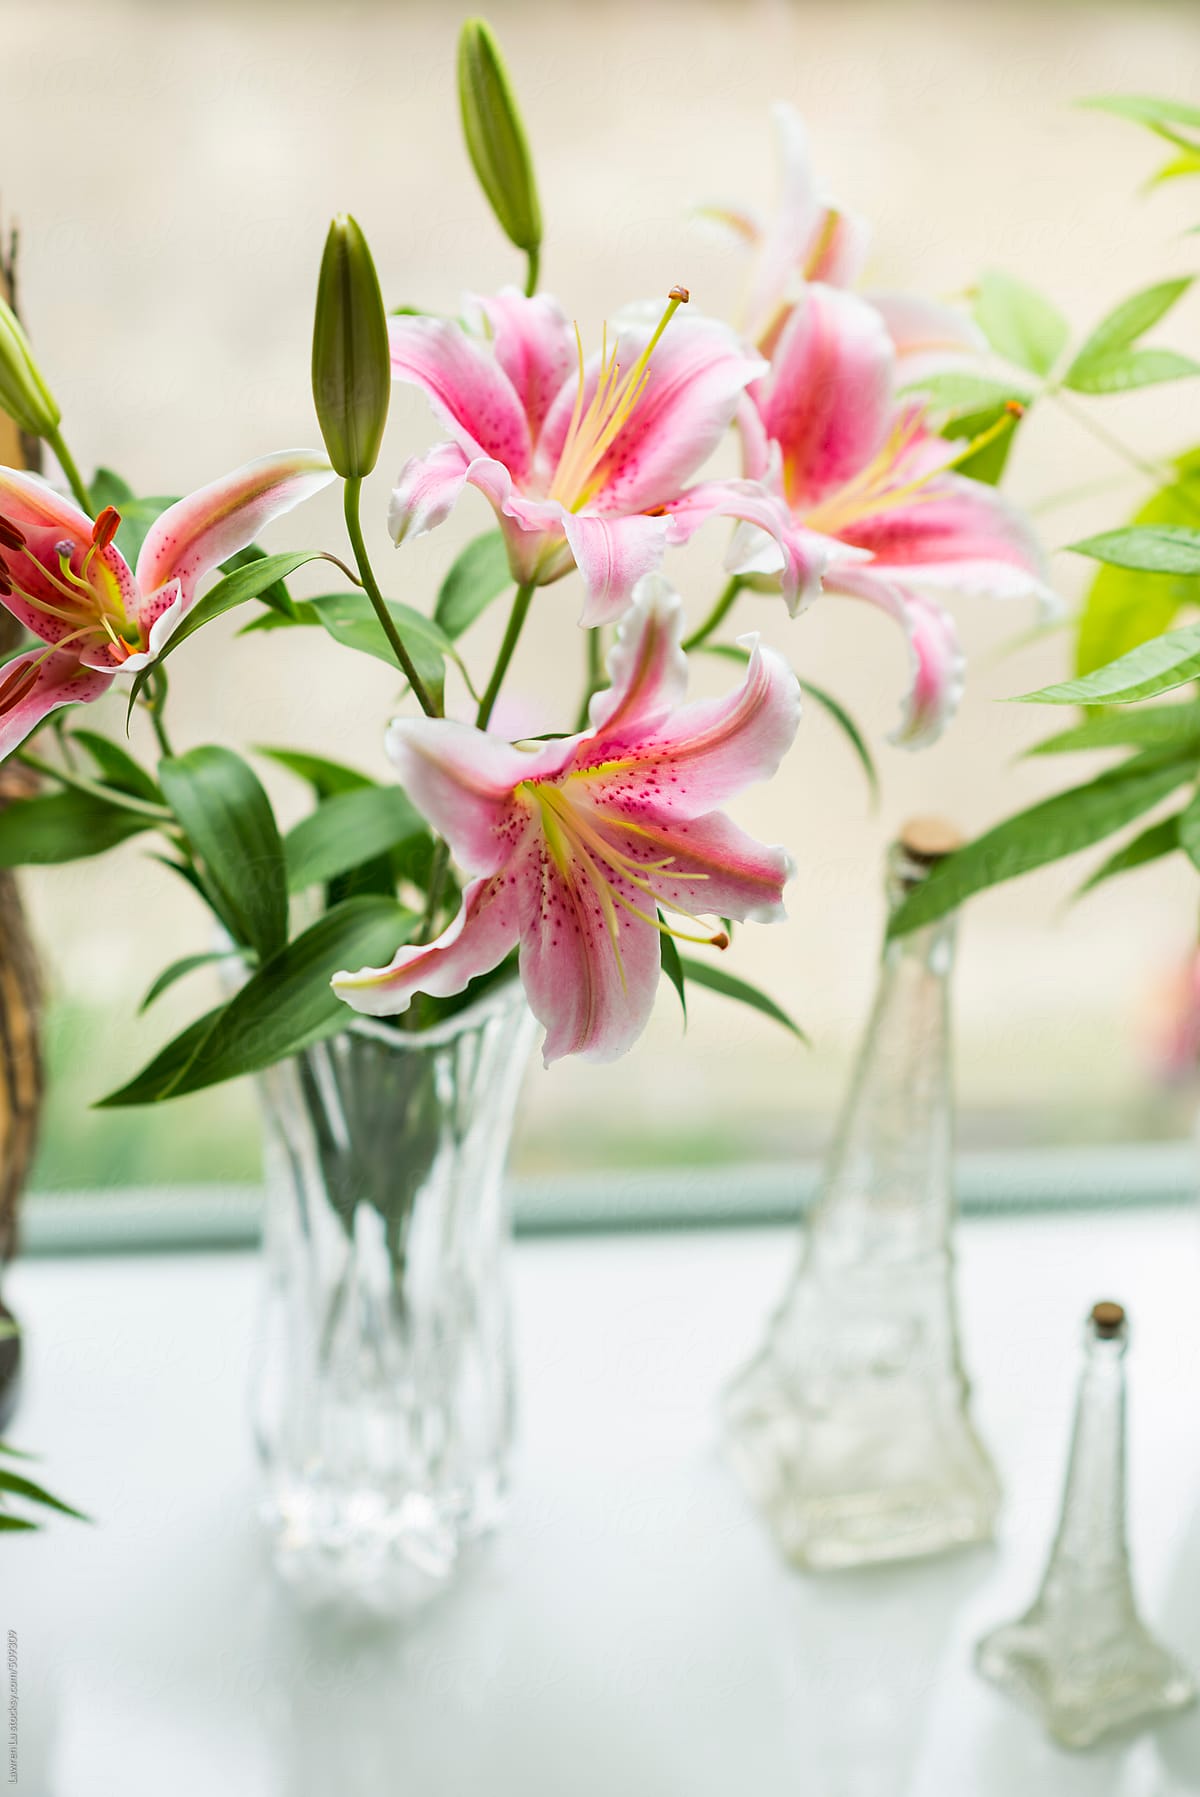 Pink and white lily in glass vase with green leaves